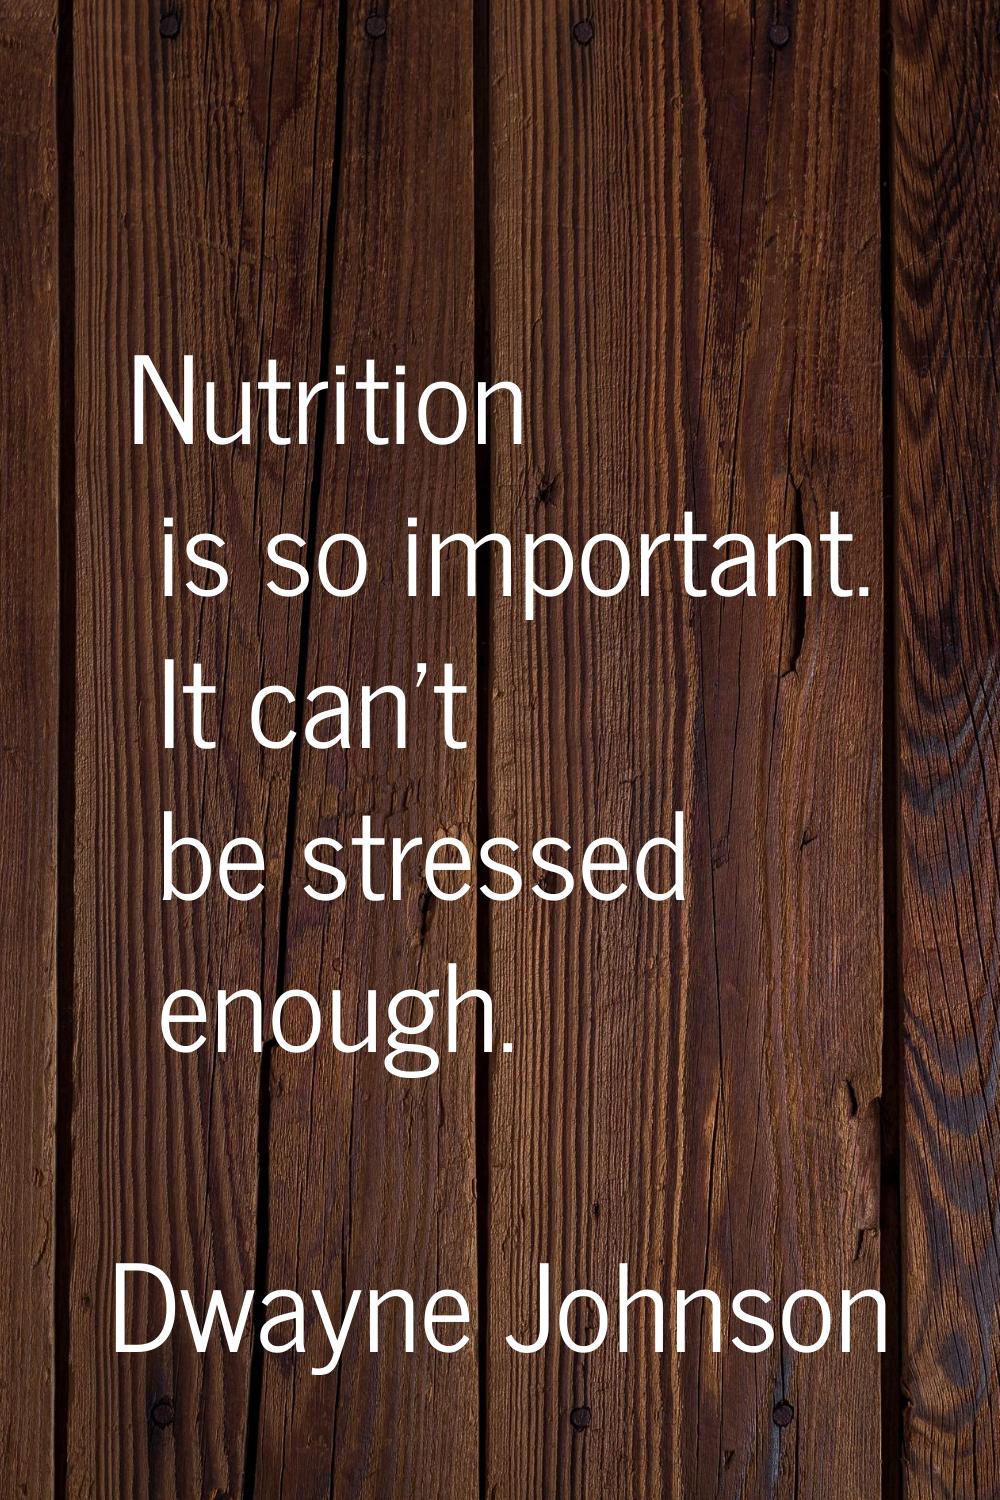 Nutrition is so important. It can't be stressed enough.